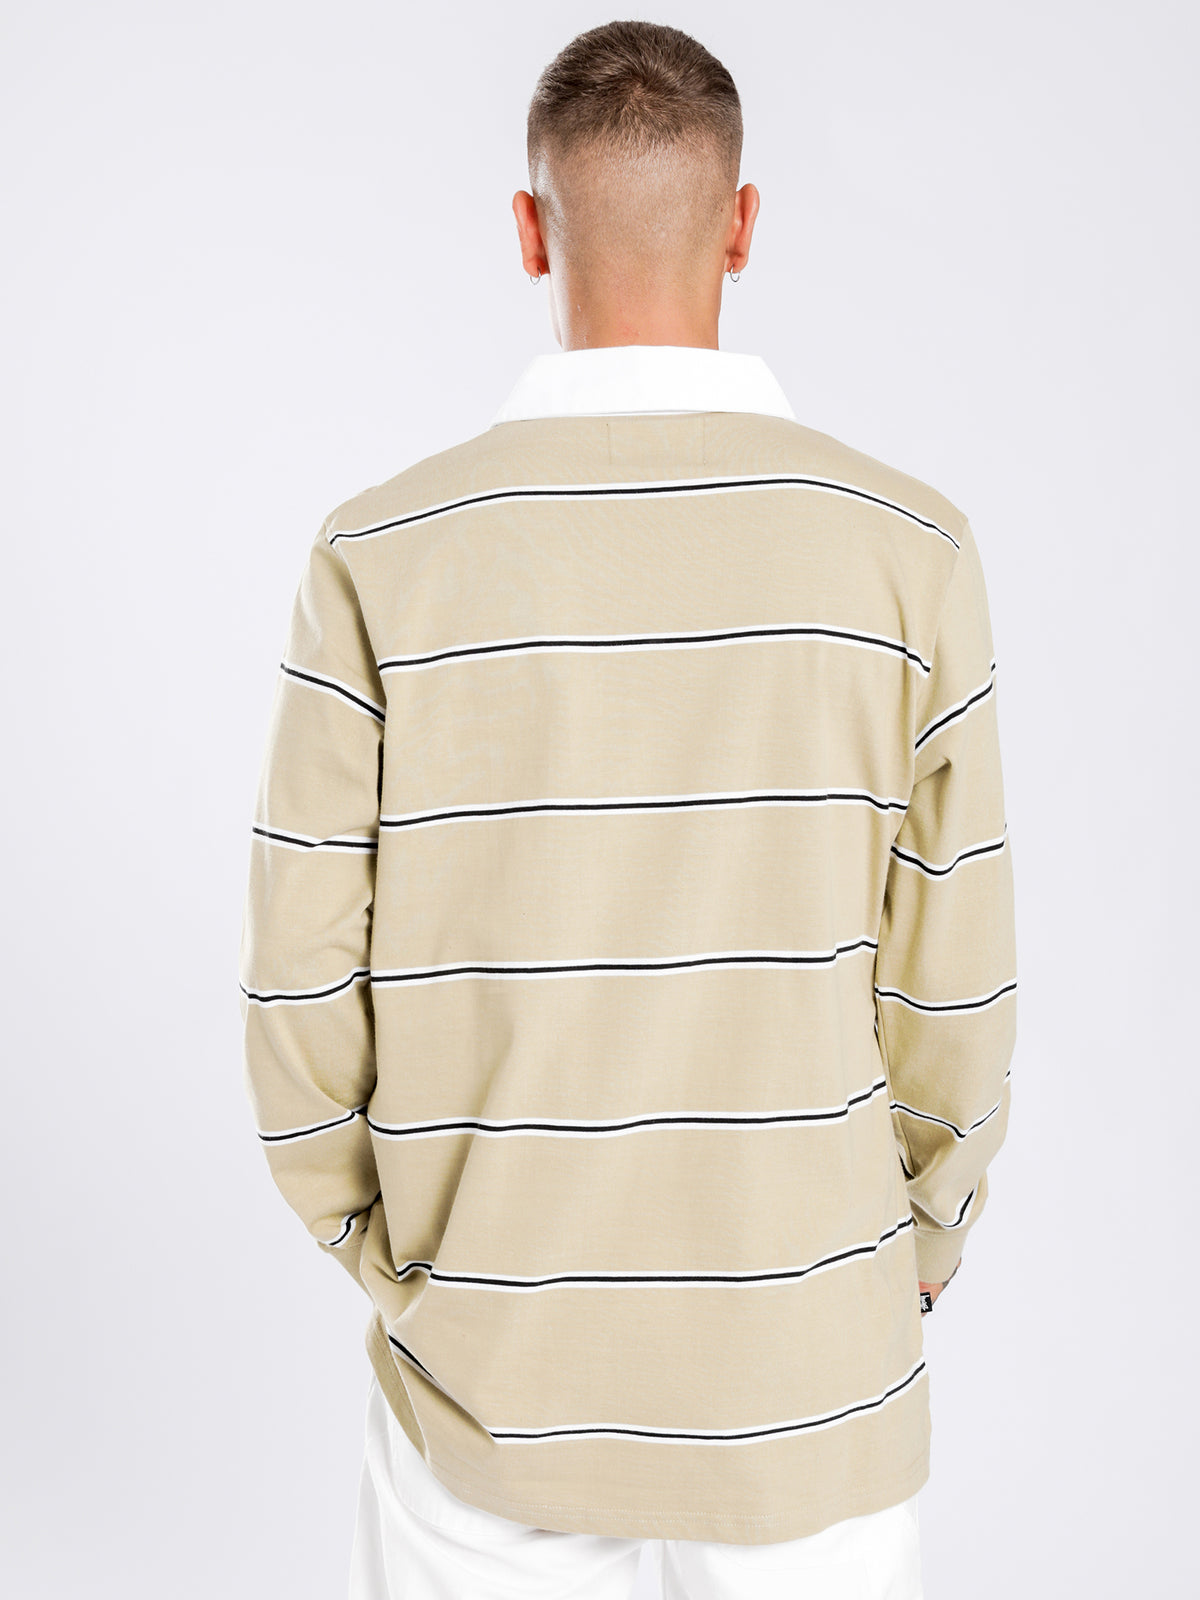 Filmore Stripe Rugby Shirt in Light Sand